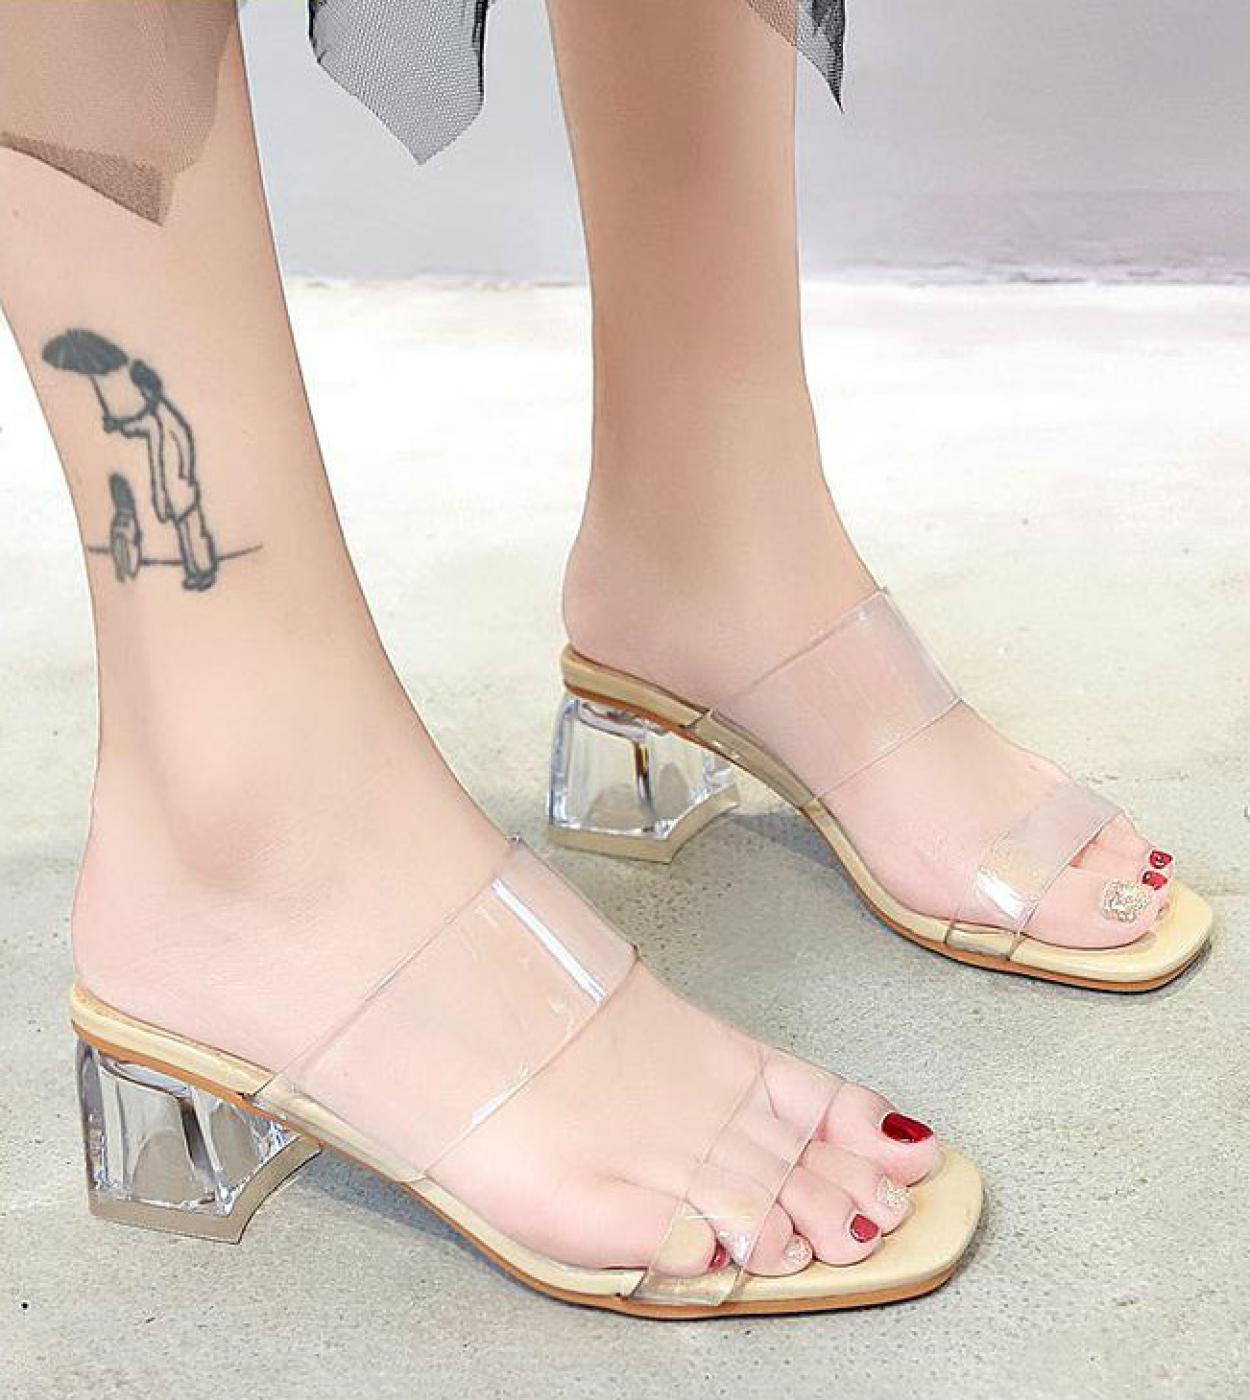 Hot Clear Heels Slippers Women Sandals Summer Shoes Woman Transparent High Pumps Wedding Jelly Buty Damskie   Square Hee